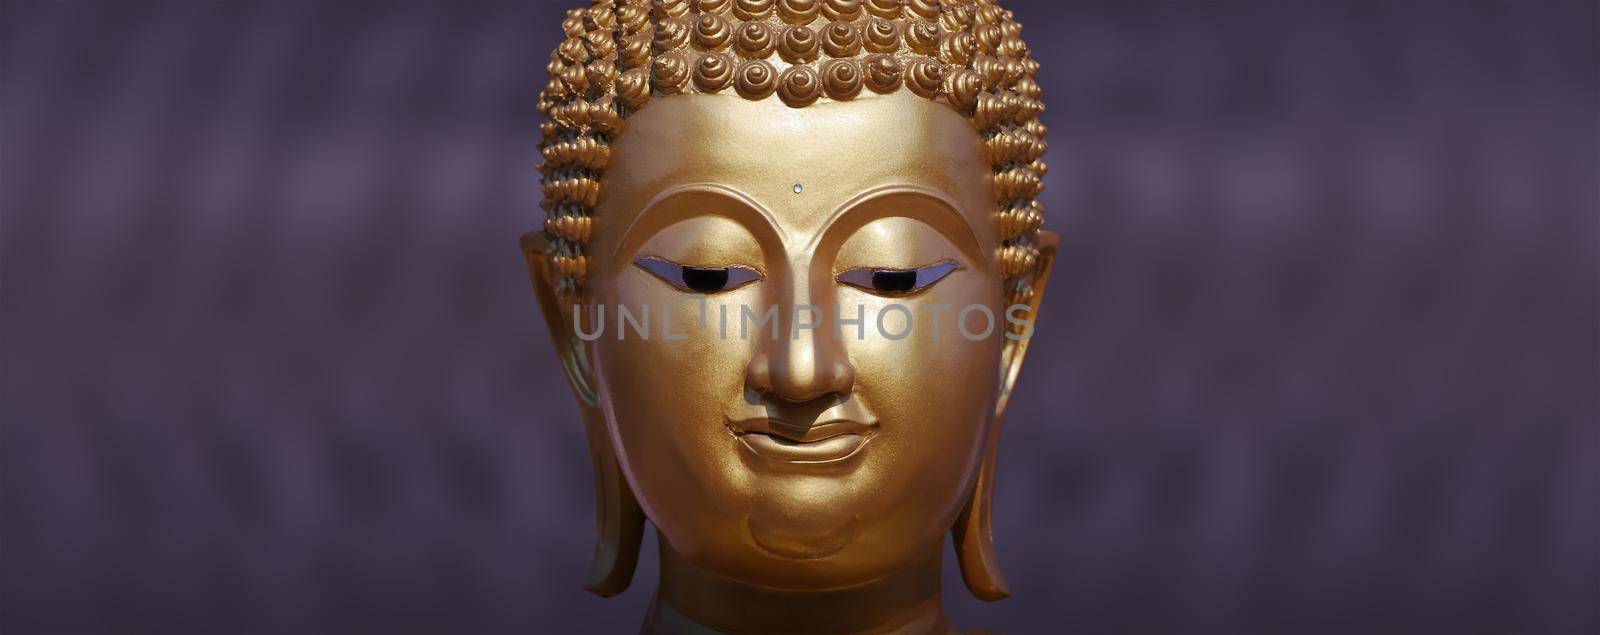 Golden Buddha statue close up by toa55